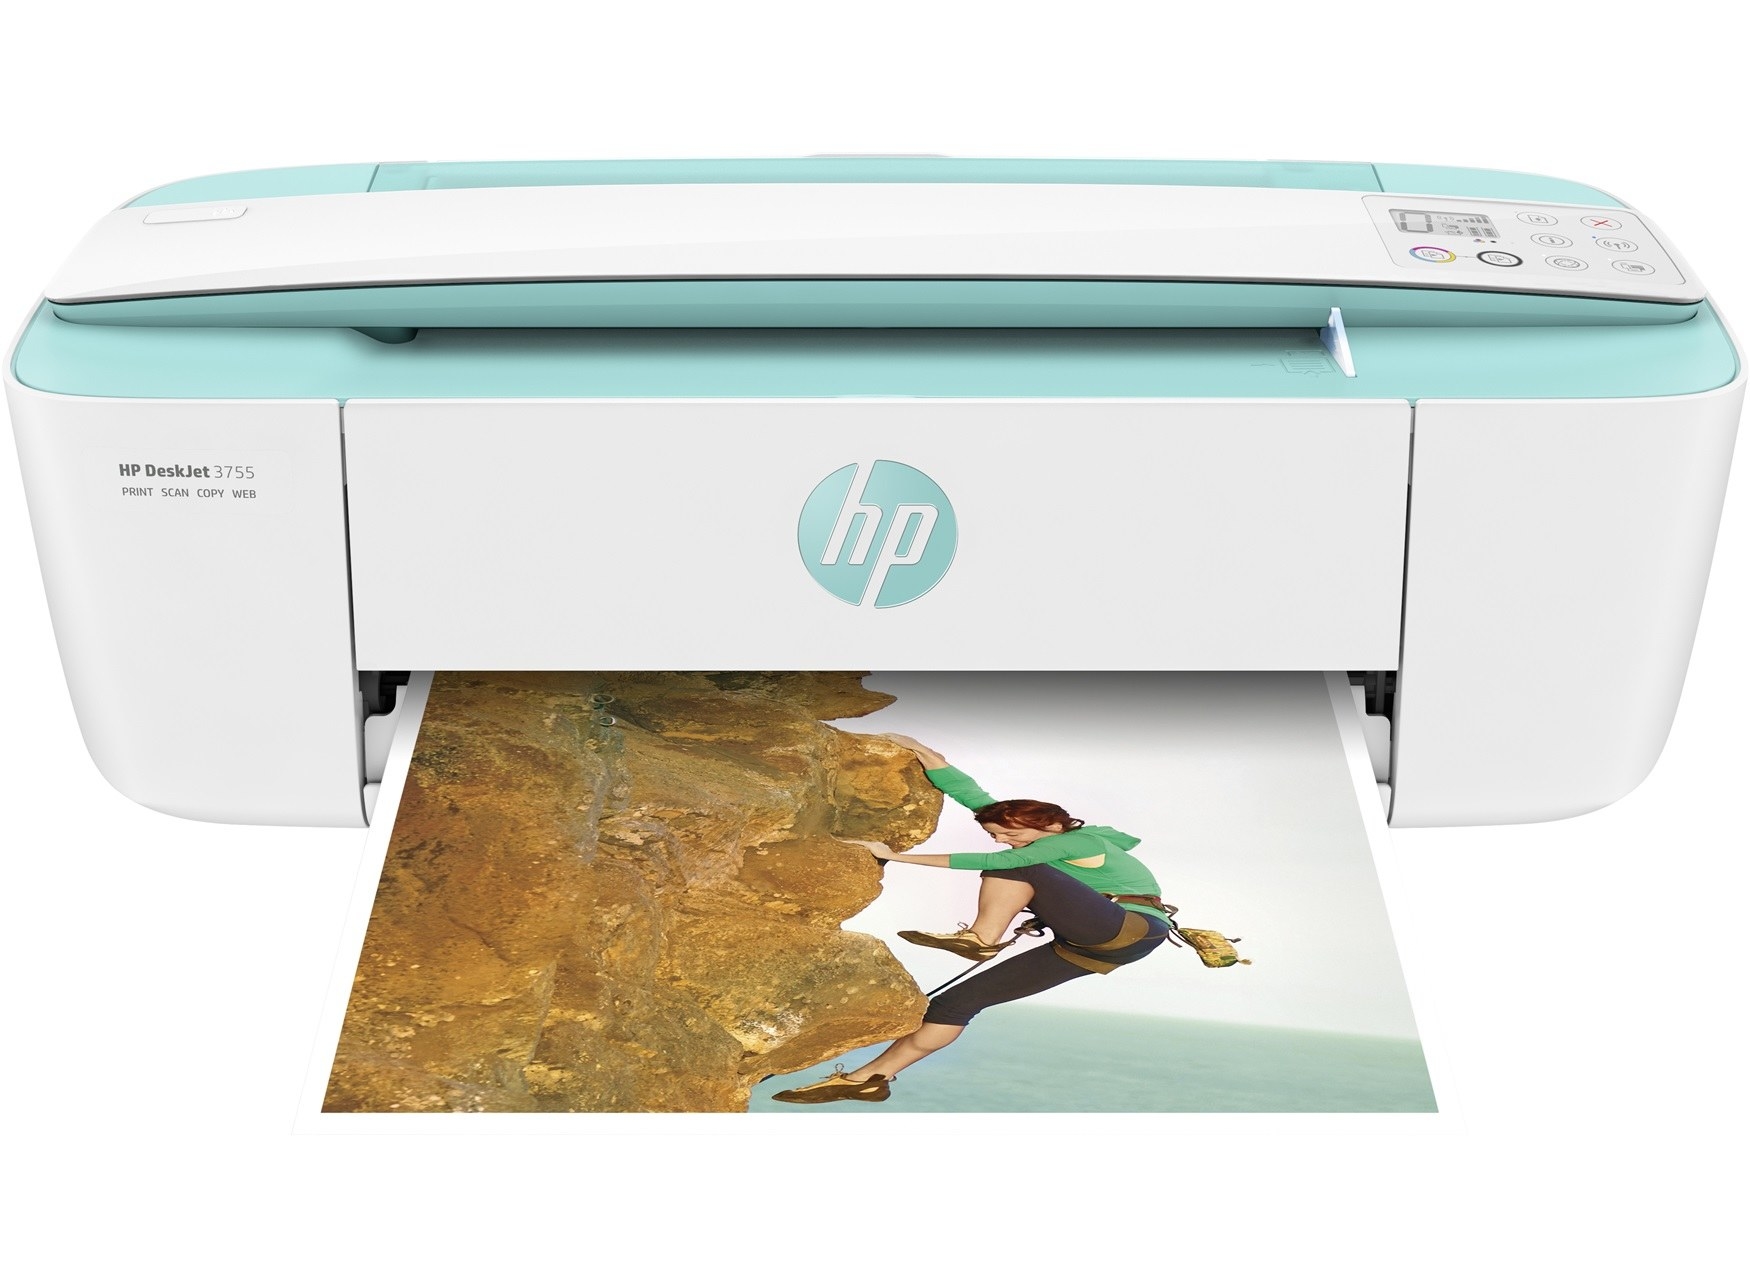 A large computer printer on a plain background